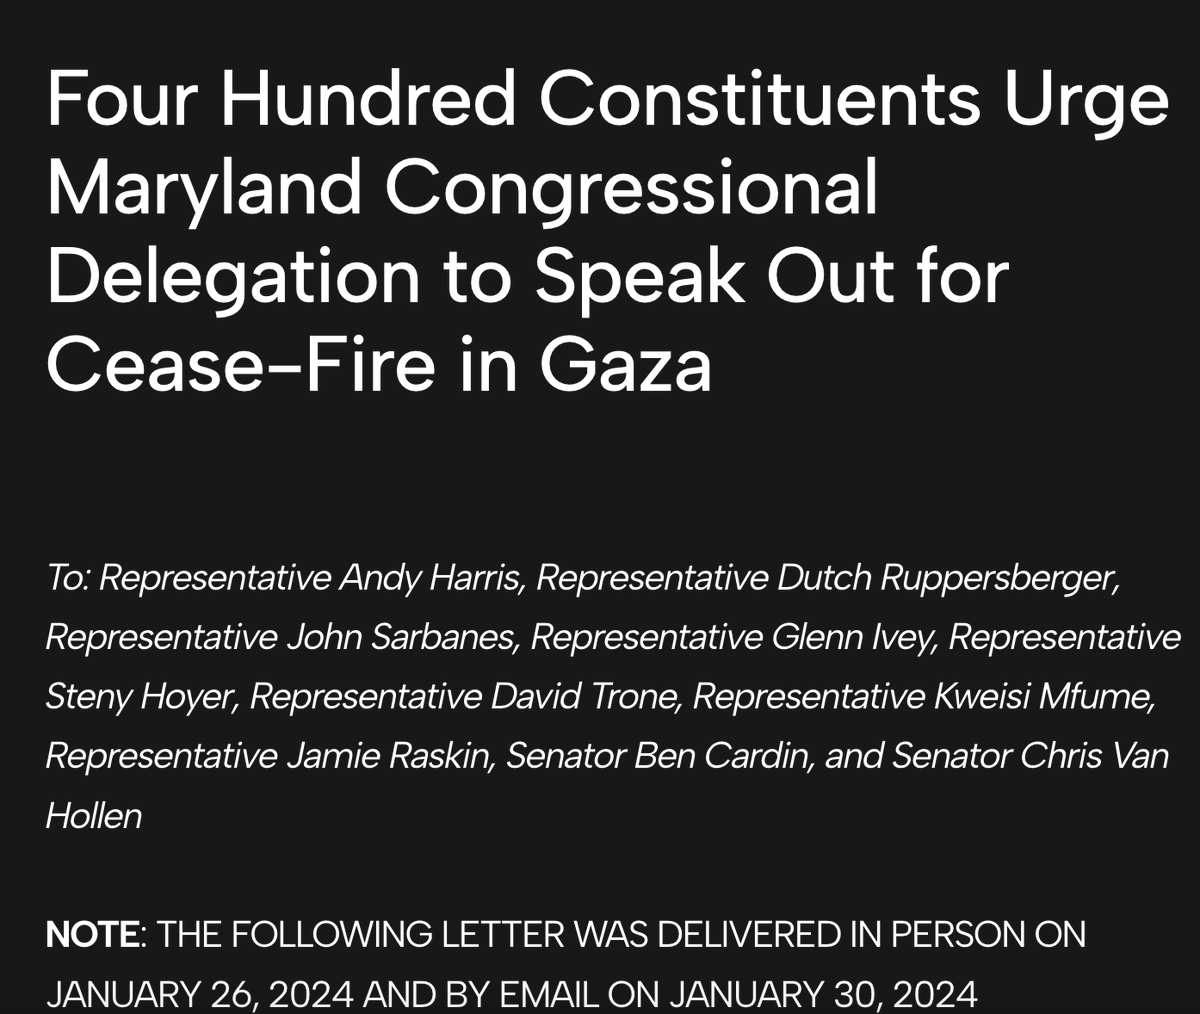 Marylanders urge you: publicly call for a cease-fire & an end to ongoing harms to civilians in Gaza 

@RepAndyHarrisMD  @Call_Me_Dutch @RepSarbanes @RepGlennIvey @RepStenyHoyer @RepDavidTrone @RepKweisiMfume  @RepRaskin @ChrisVanHollen @SenatorCardin

tinyurl.com/MDforceasefire